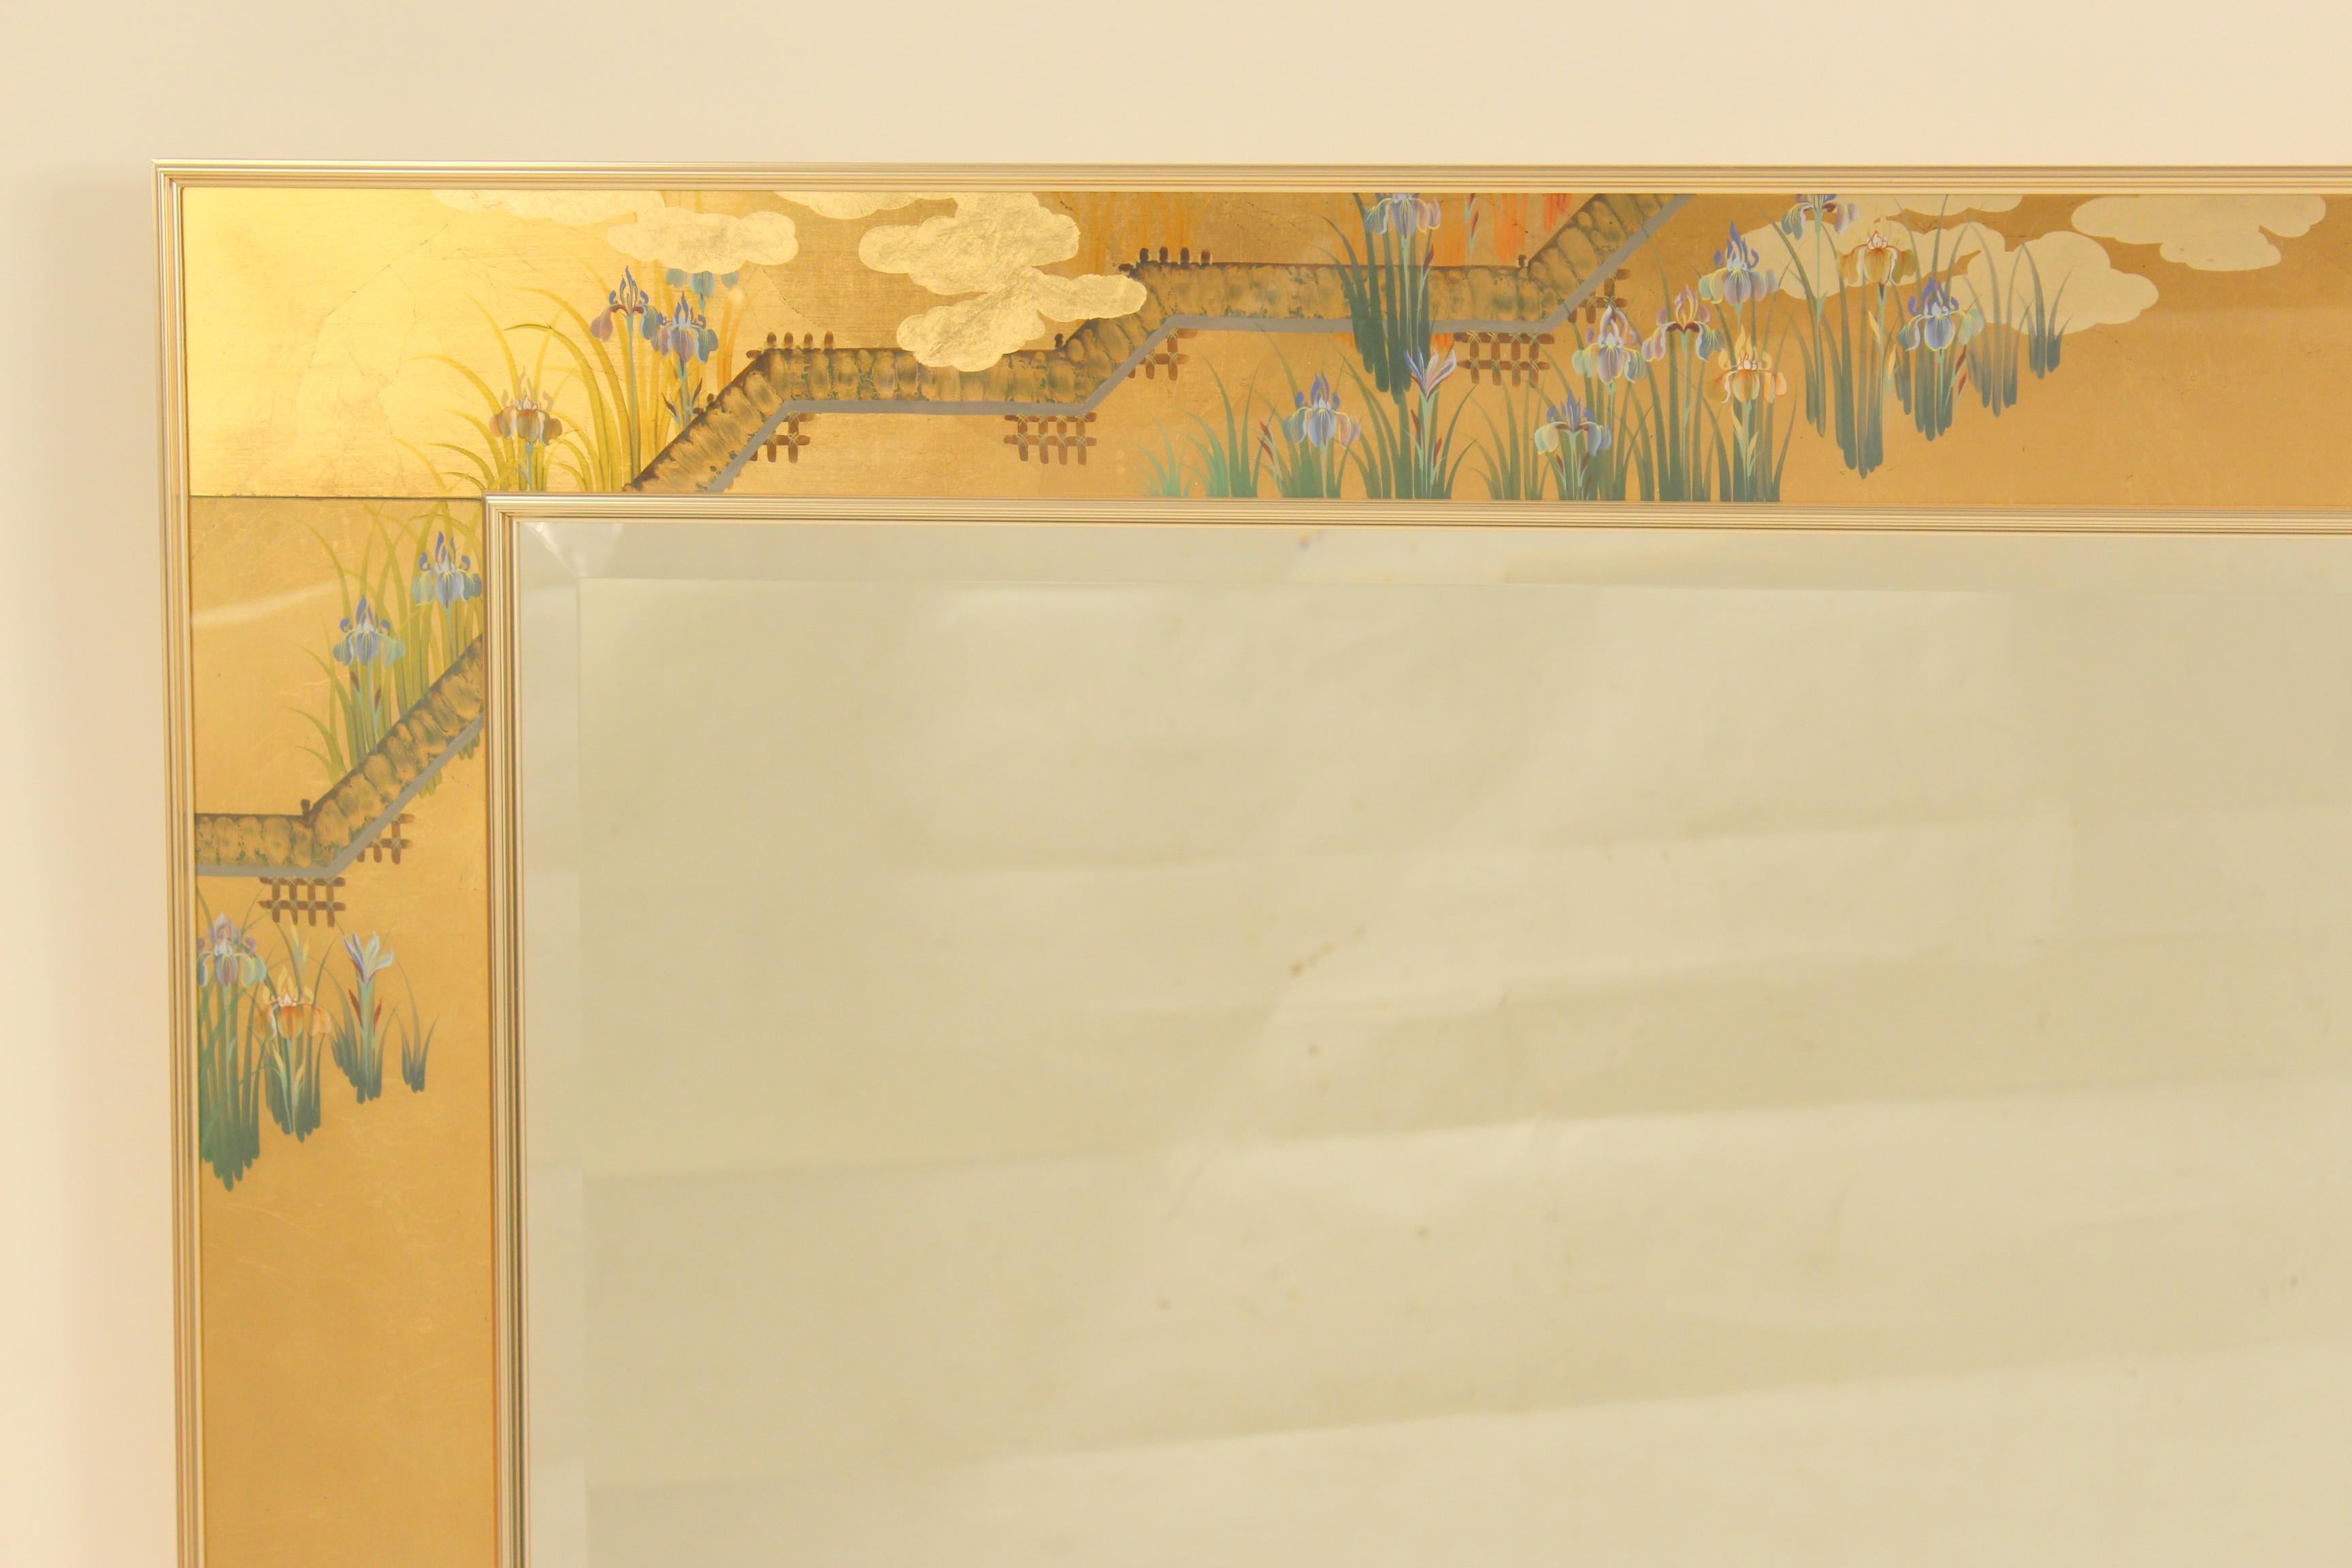 Le Barge chinoiserie style horizontal mirror with eglomise painted glass panels, signed C. Adams, dated 1987. This is a heavy mirror that will require a professional to hang it.